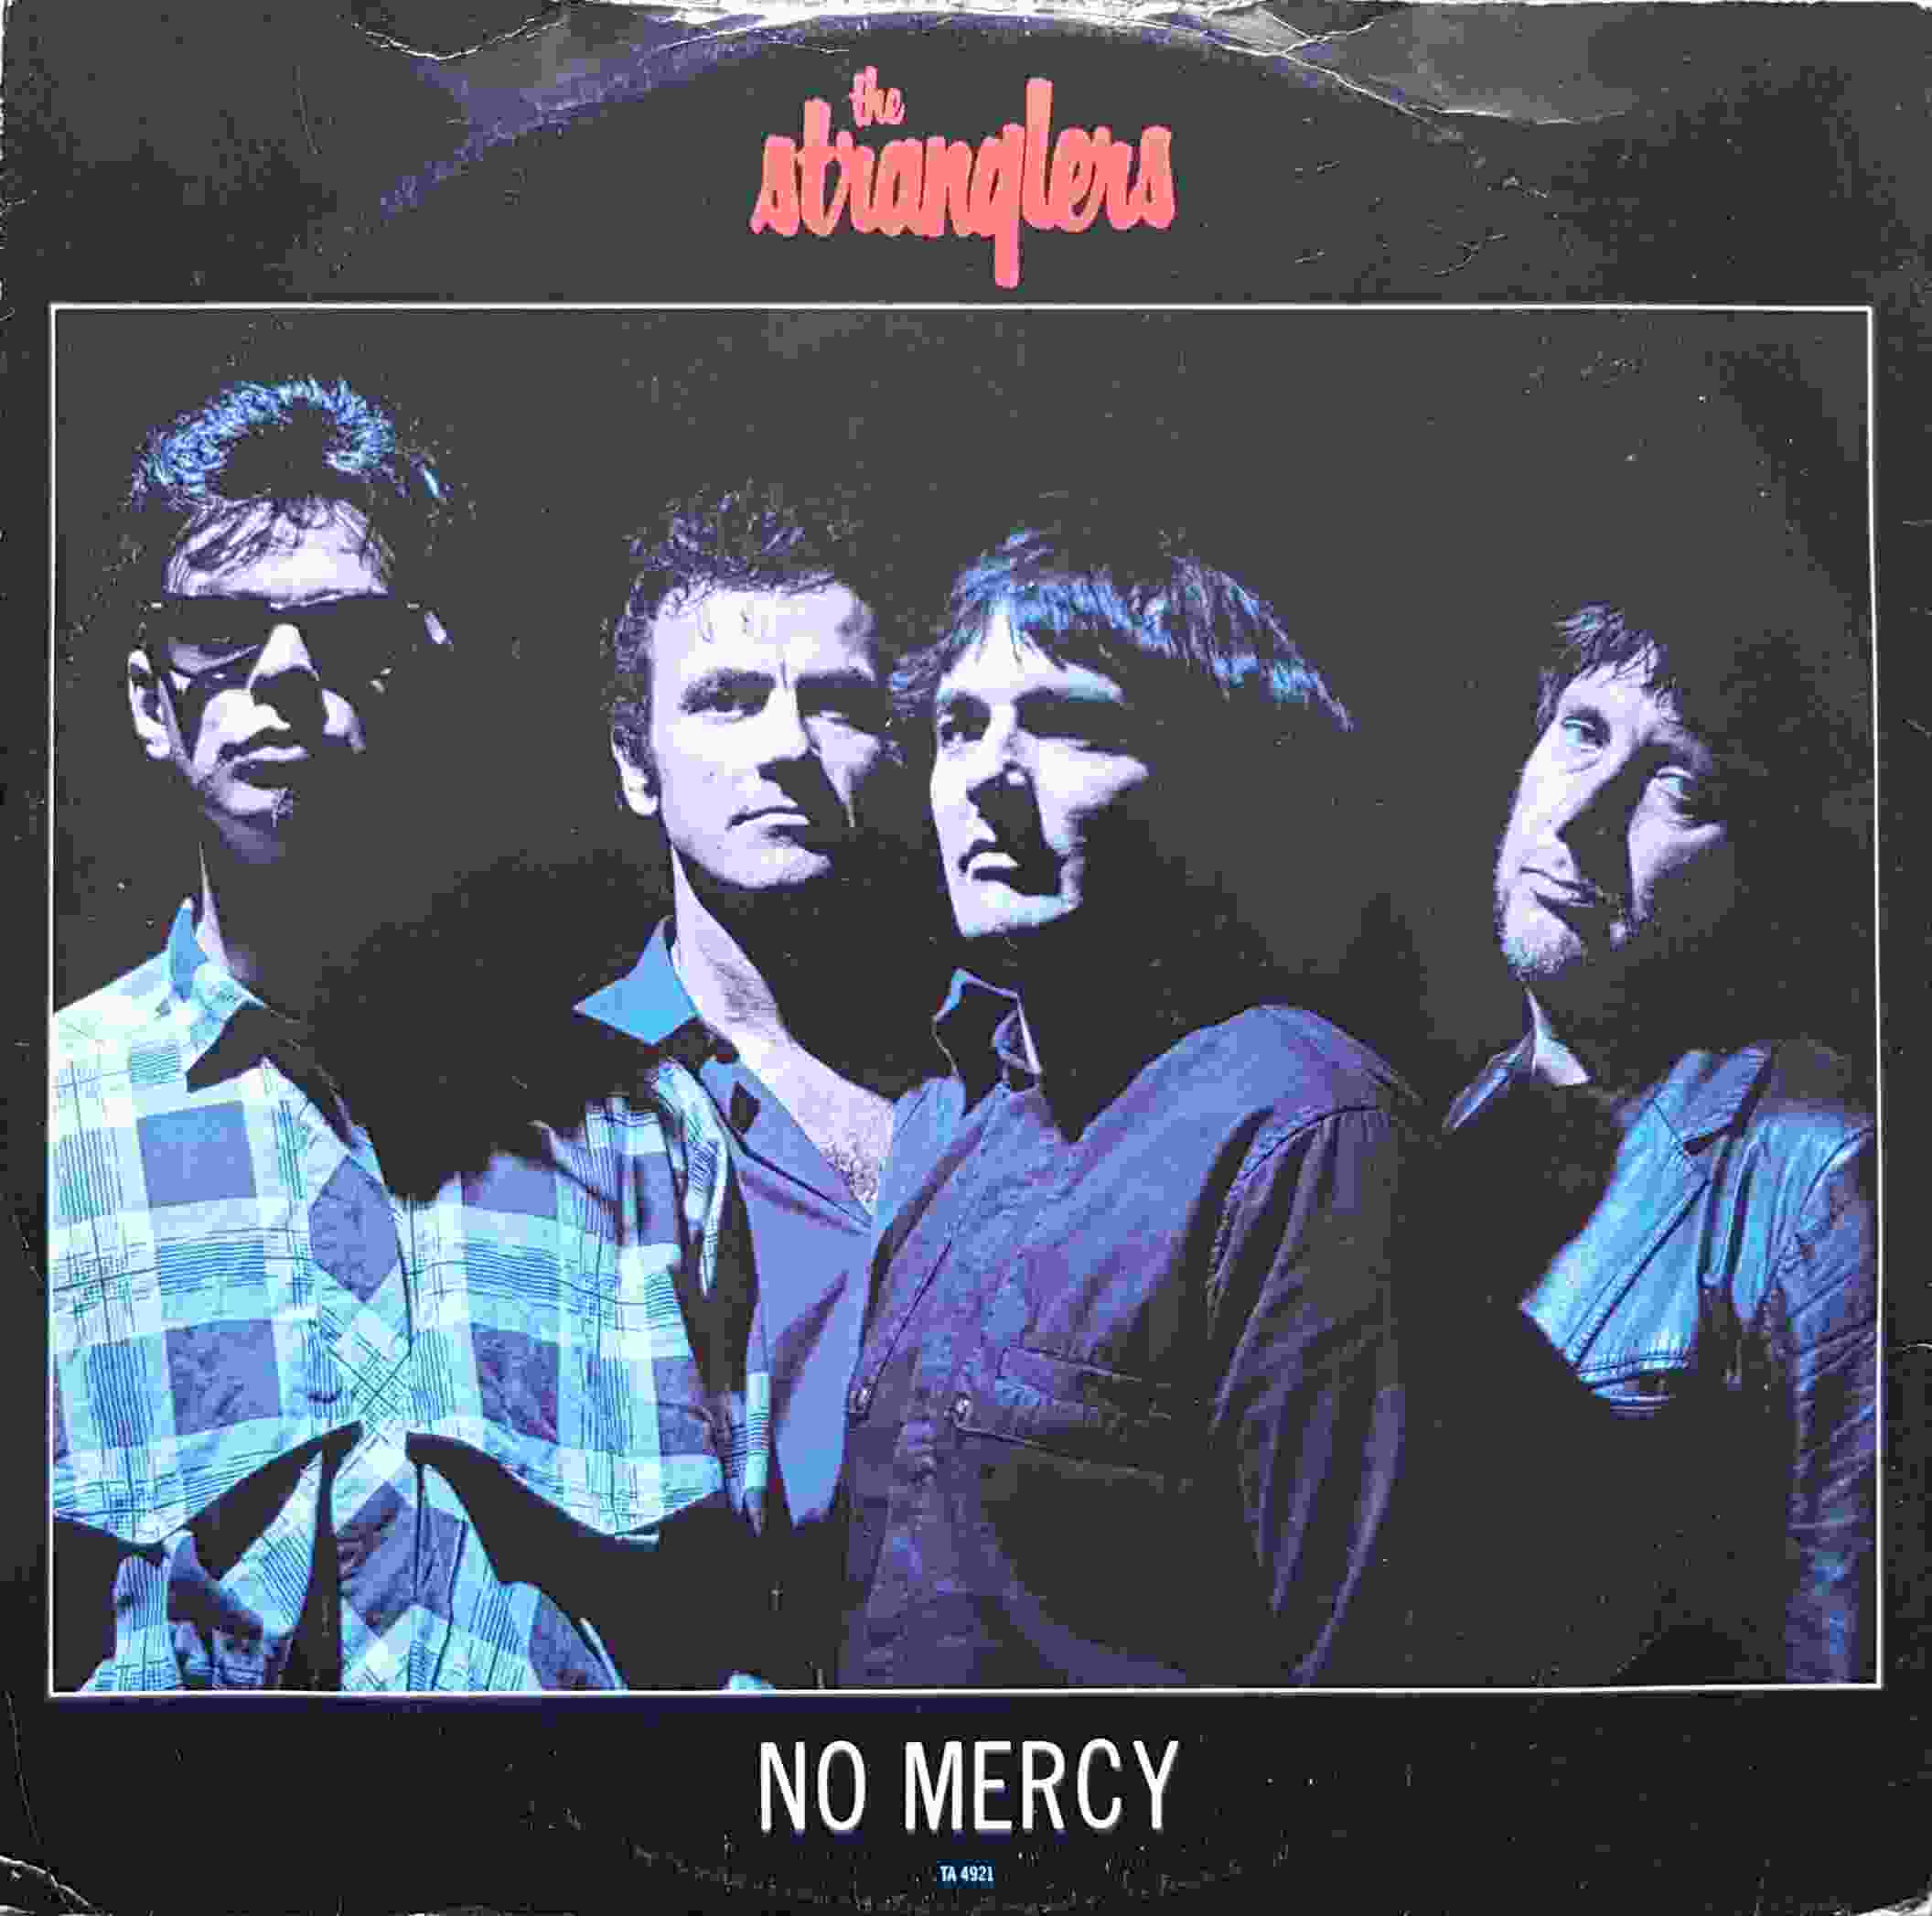 Picture of No mercy by artist The Stranglers from The Stranglers 12inches